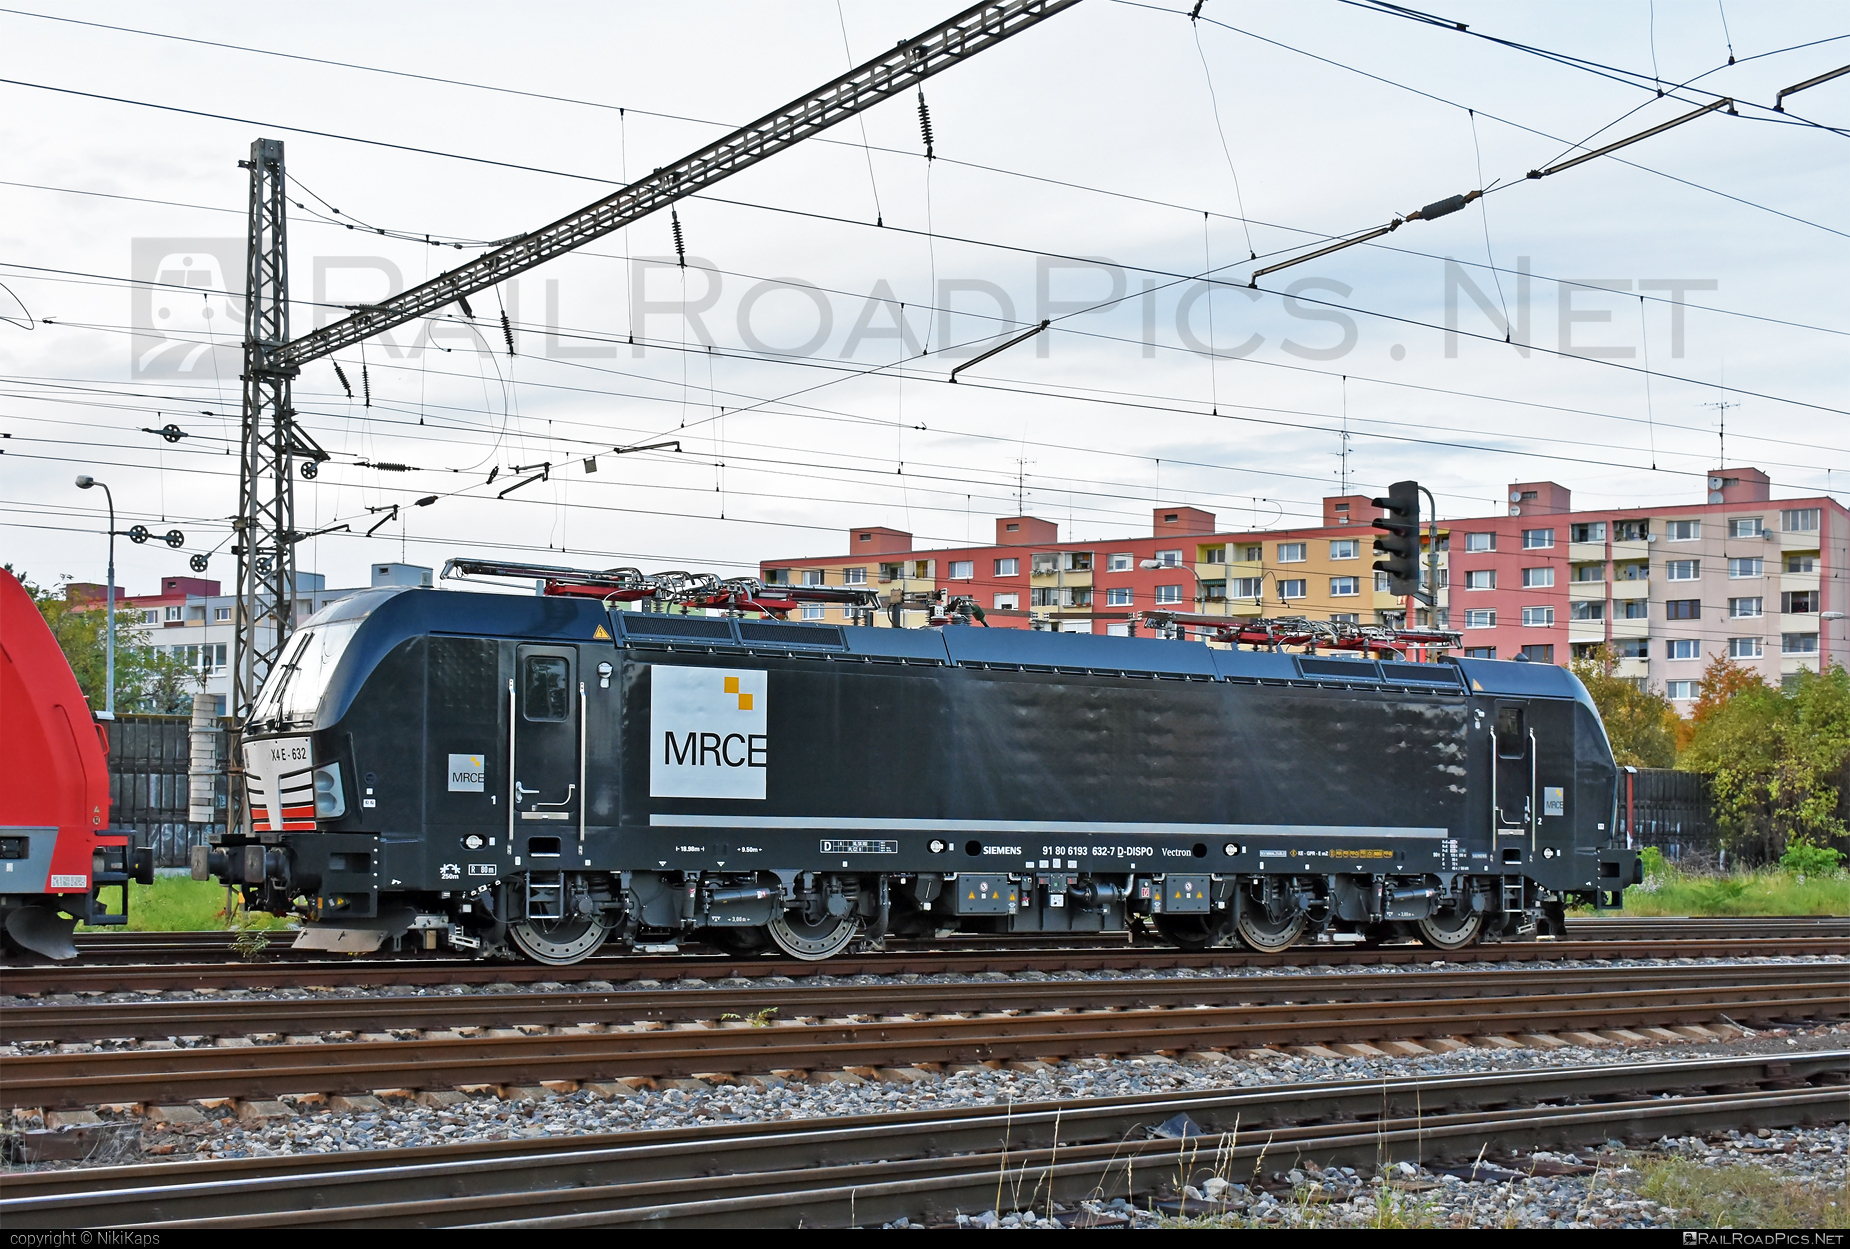 Siemens Vectron MS - 193 632 operated by Retrack Slovakia s. r. o. #dispolok #mitsuirailcapitaleurope #mitsuirailcapitaleuropegmbh #mrce #retrack #retrackslovakia #siemens #siemensVectron #siemensVectronMS #vectron #vectronMS